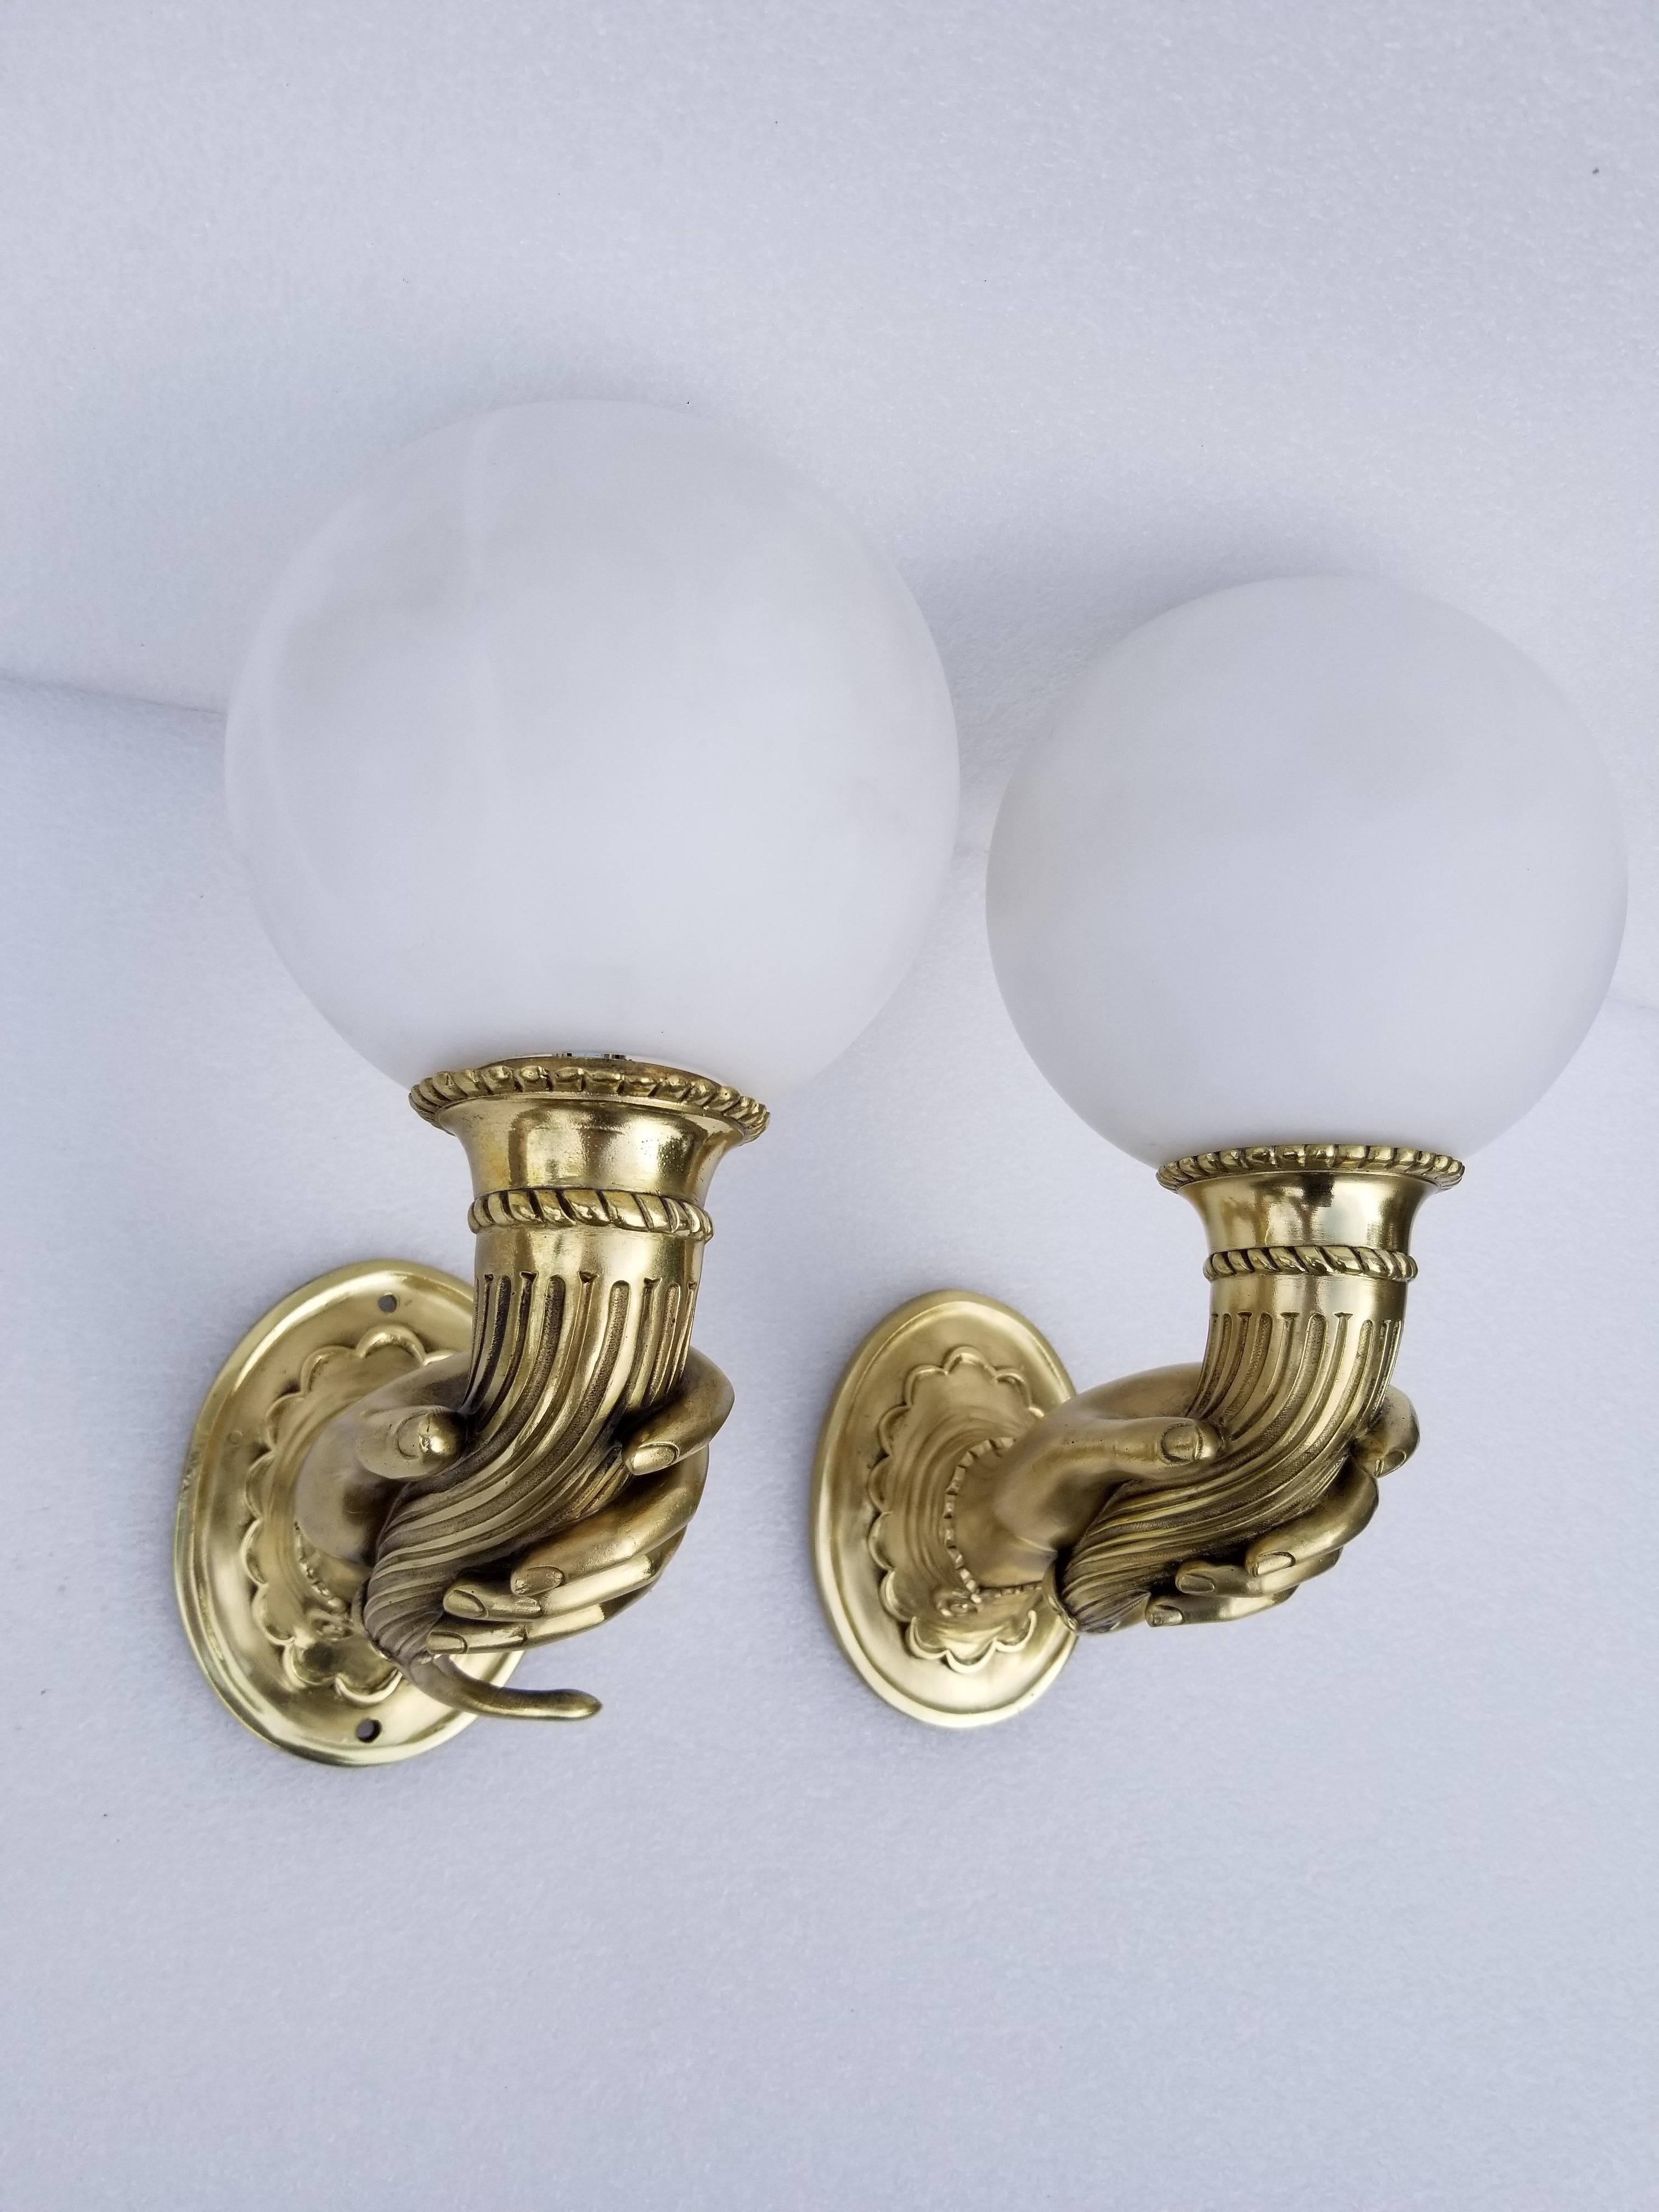 Superbe pair of bronze sconces figuring A feminine hand holding a cornucopia, rare model from 1940.
Refinished and US rewired, 60 watts max bulb. New opaline globe.
Back plate dimensions: 5 H, 4 W.
 